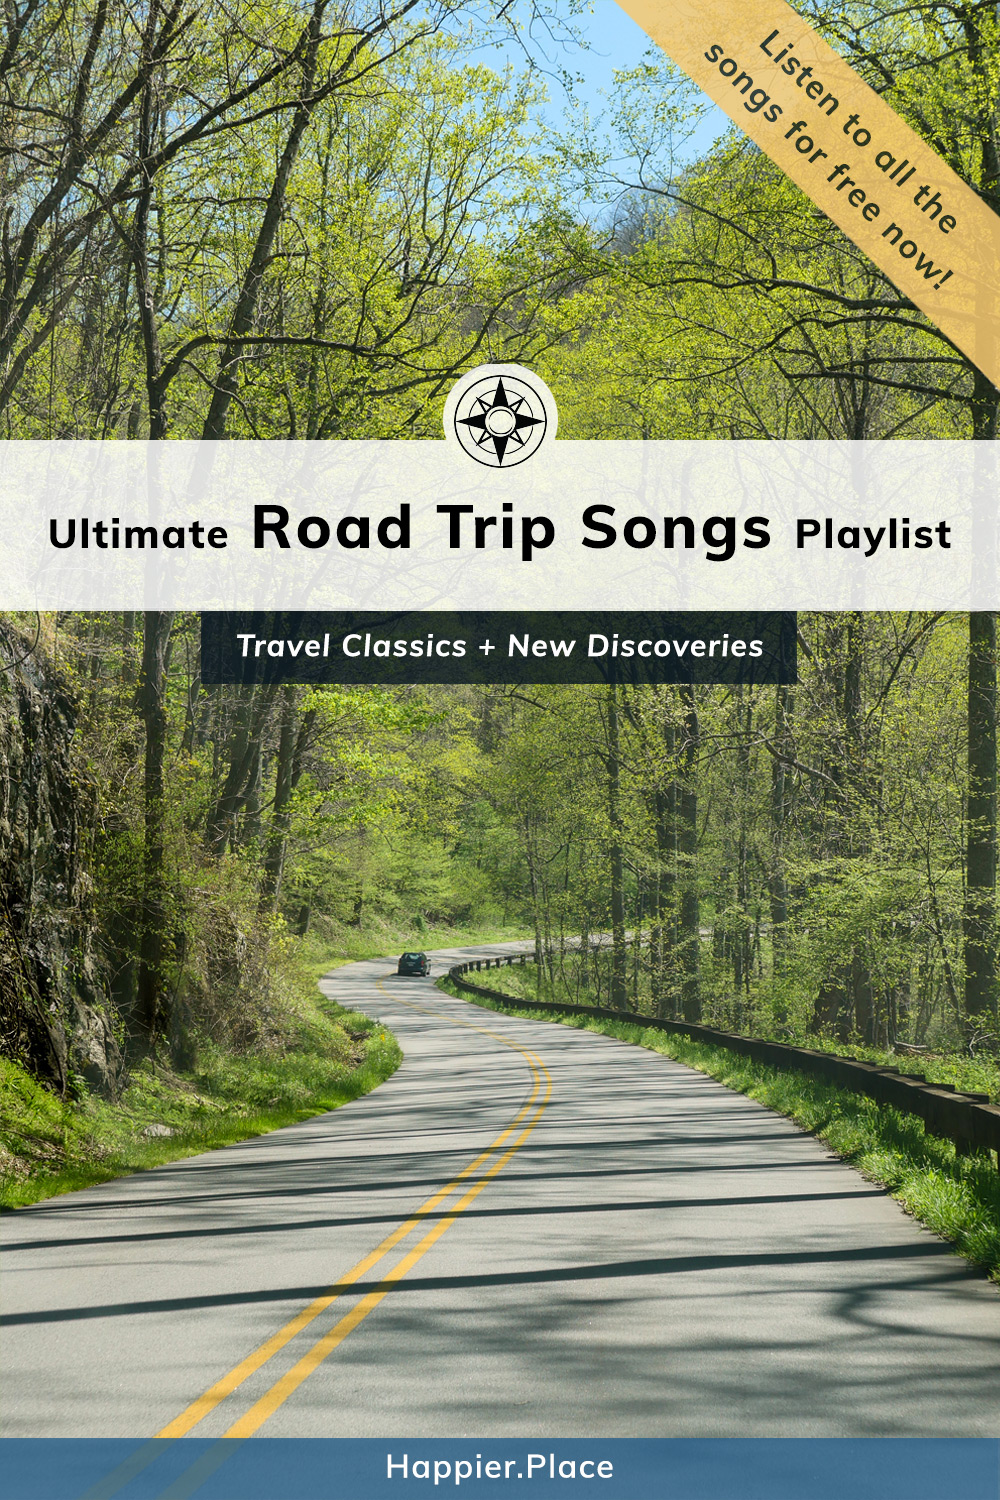 Ultimate Road Trips Songs Playlist of travel classics and new discoveries over curvy road through forest Happier Place